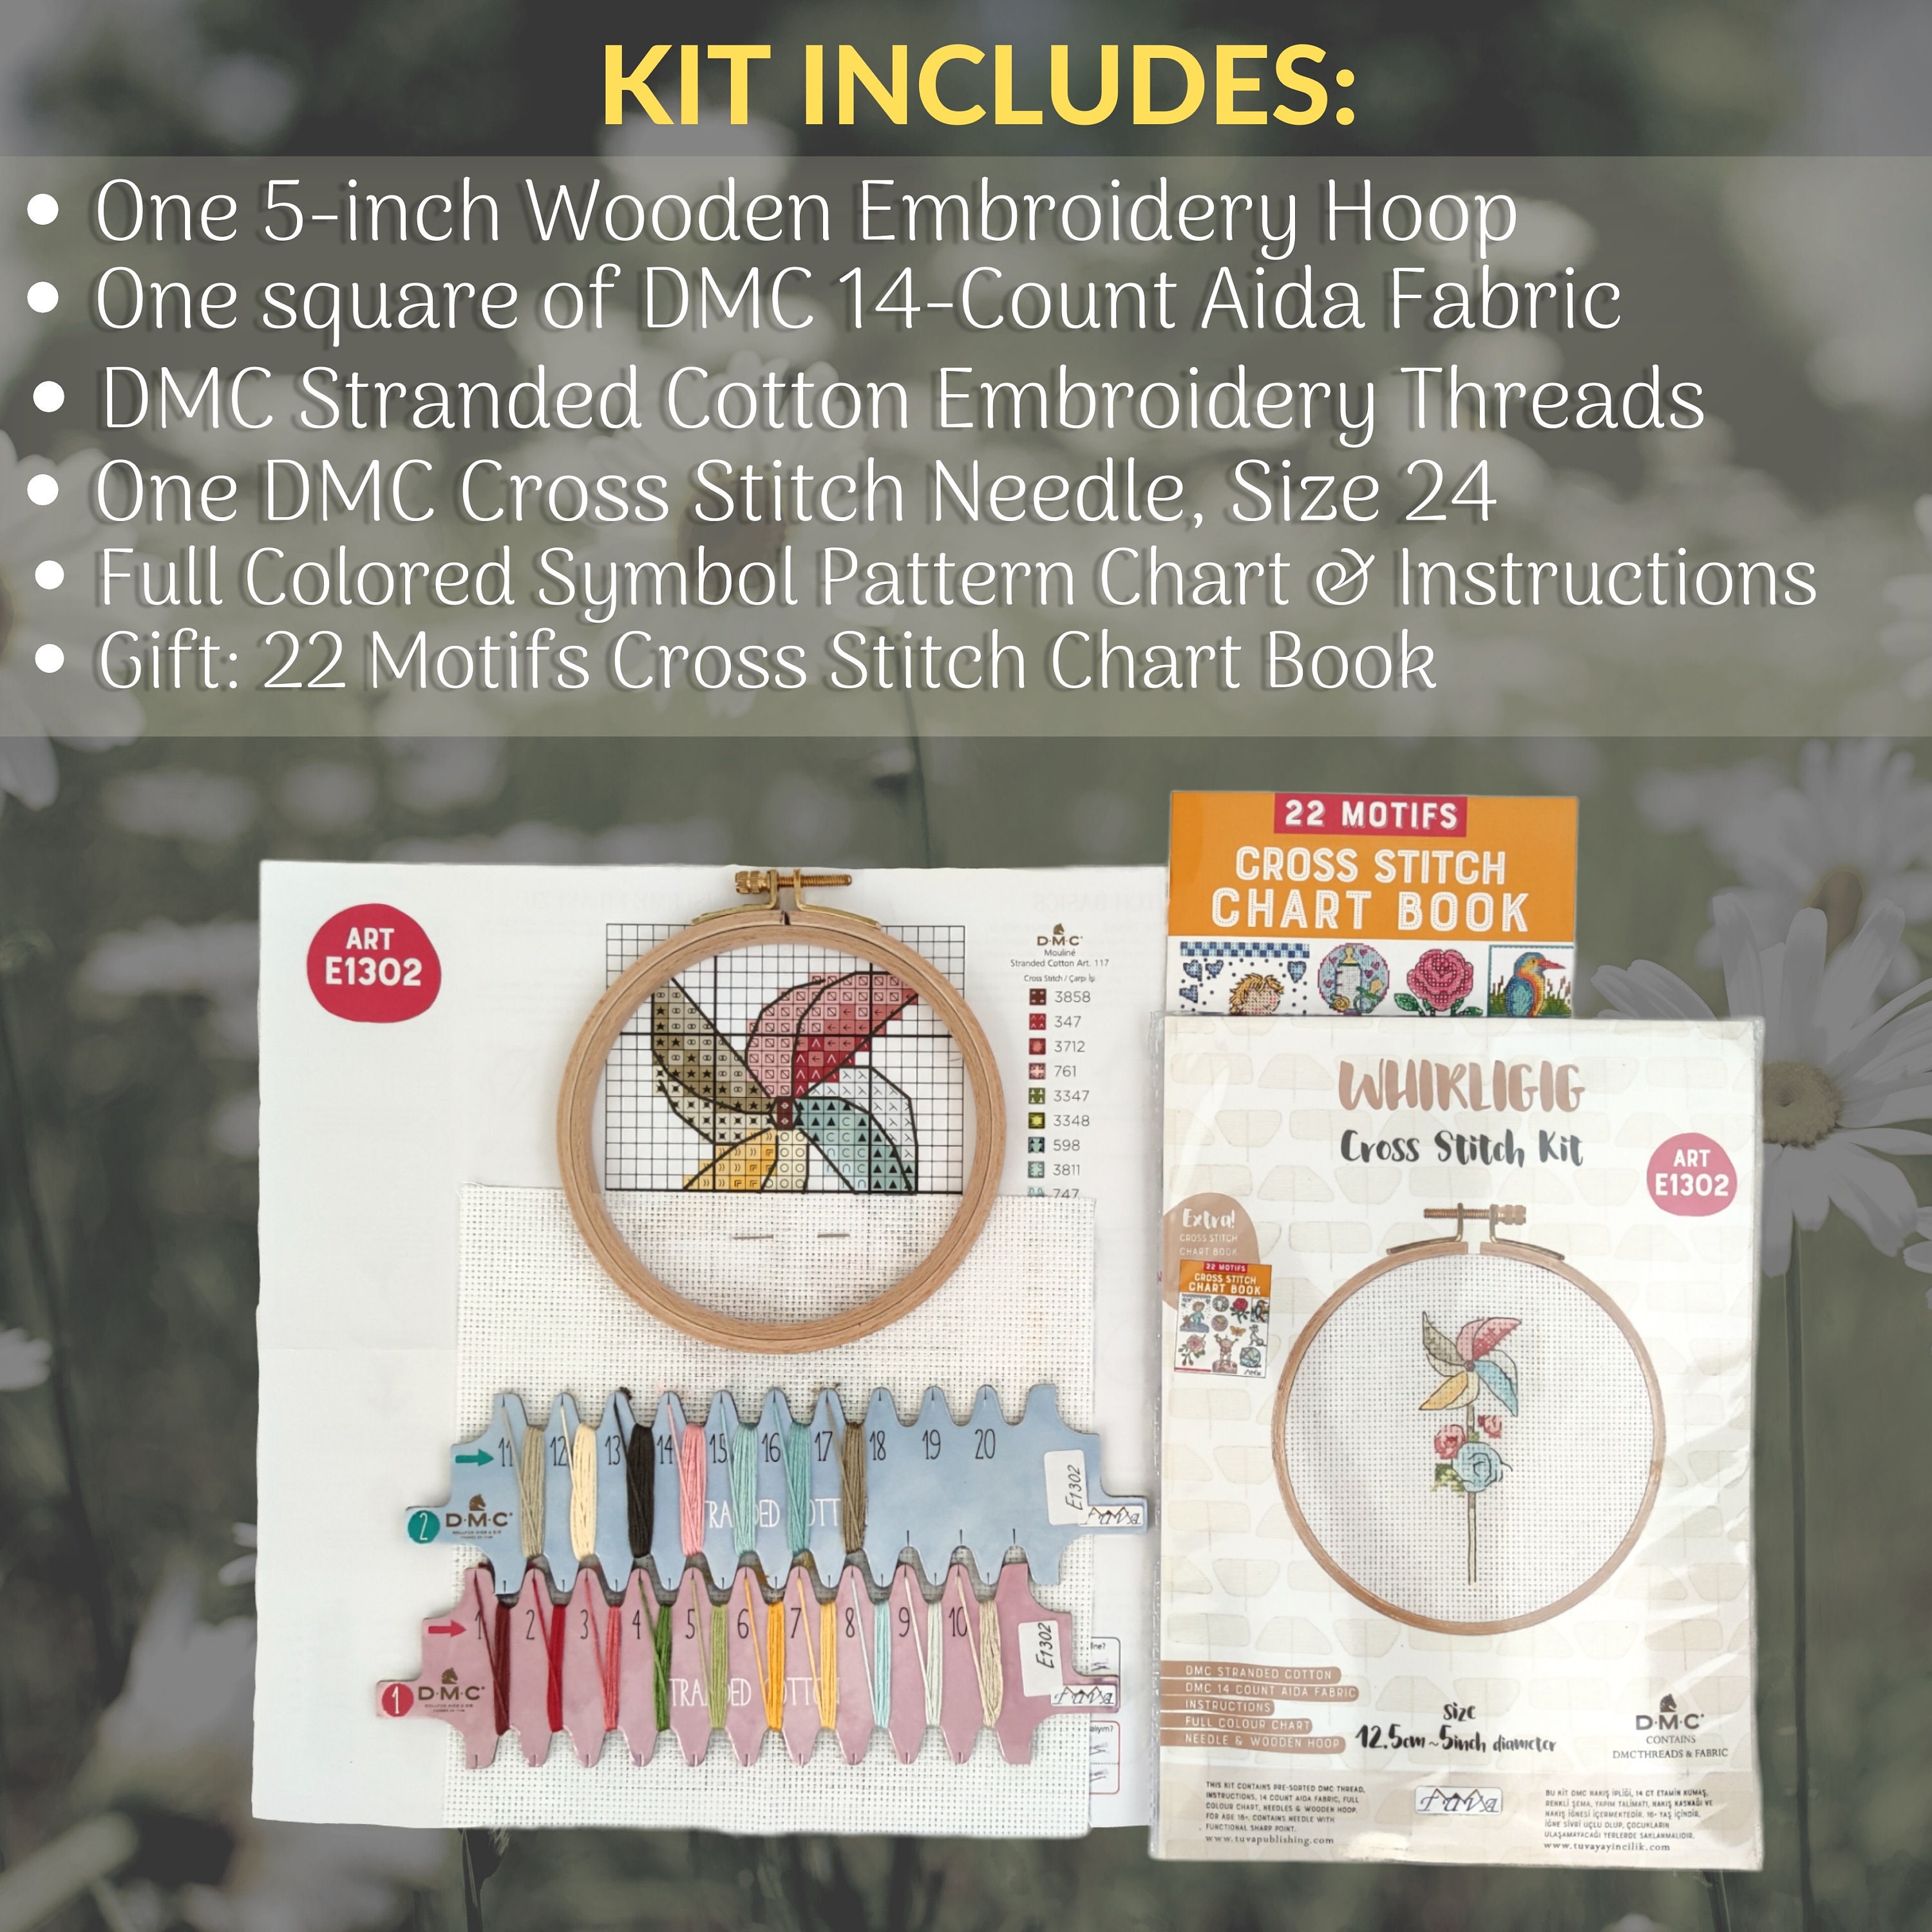 Maker Susan Whirligig Counted Cross Stitch Kits for Adults and Beginners  with Wooden Hoop, DMC Fabric, Threads and Needles, Embroidery Thread Floss